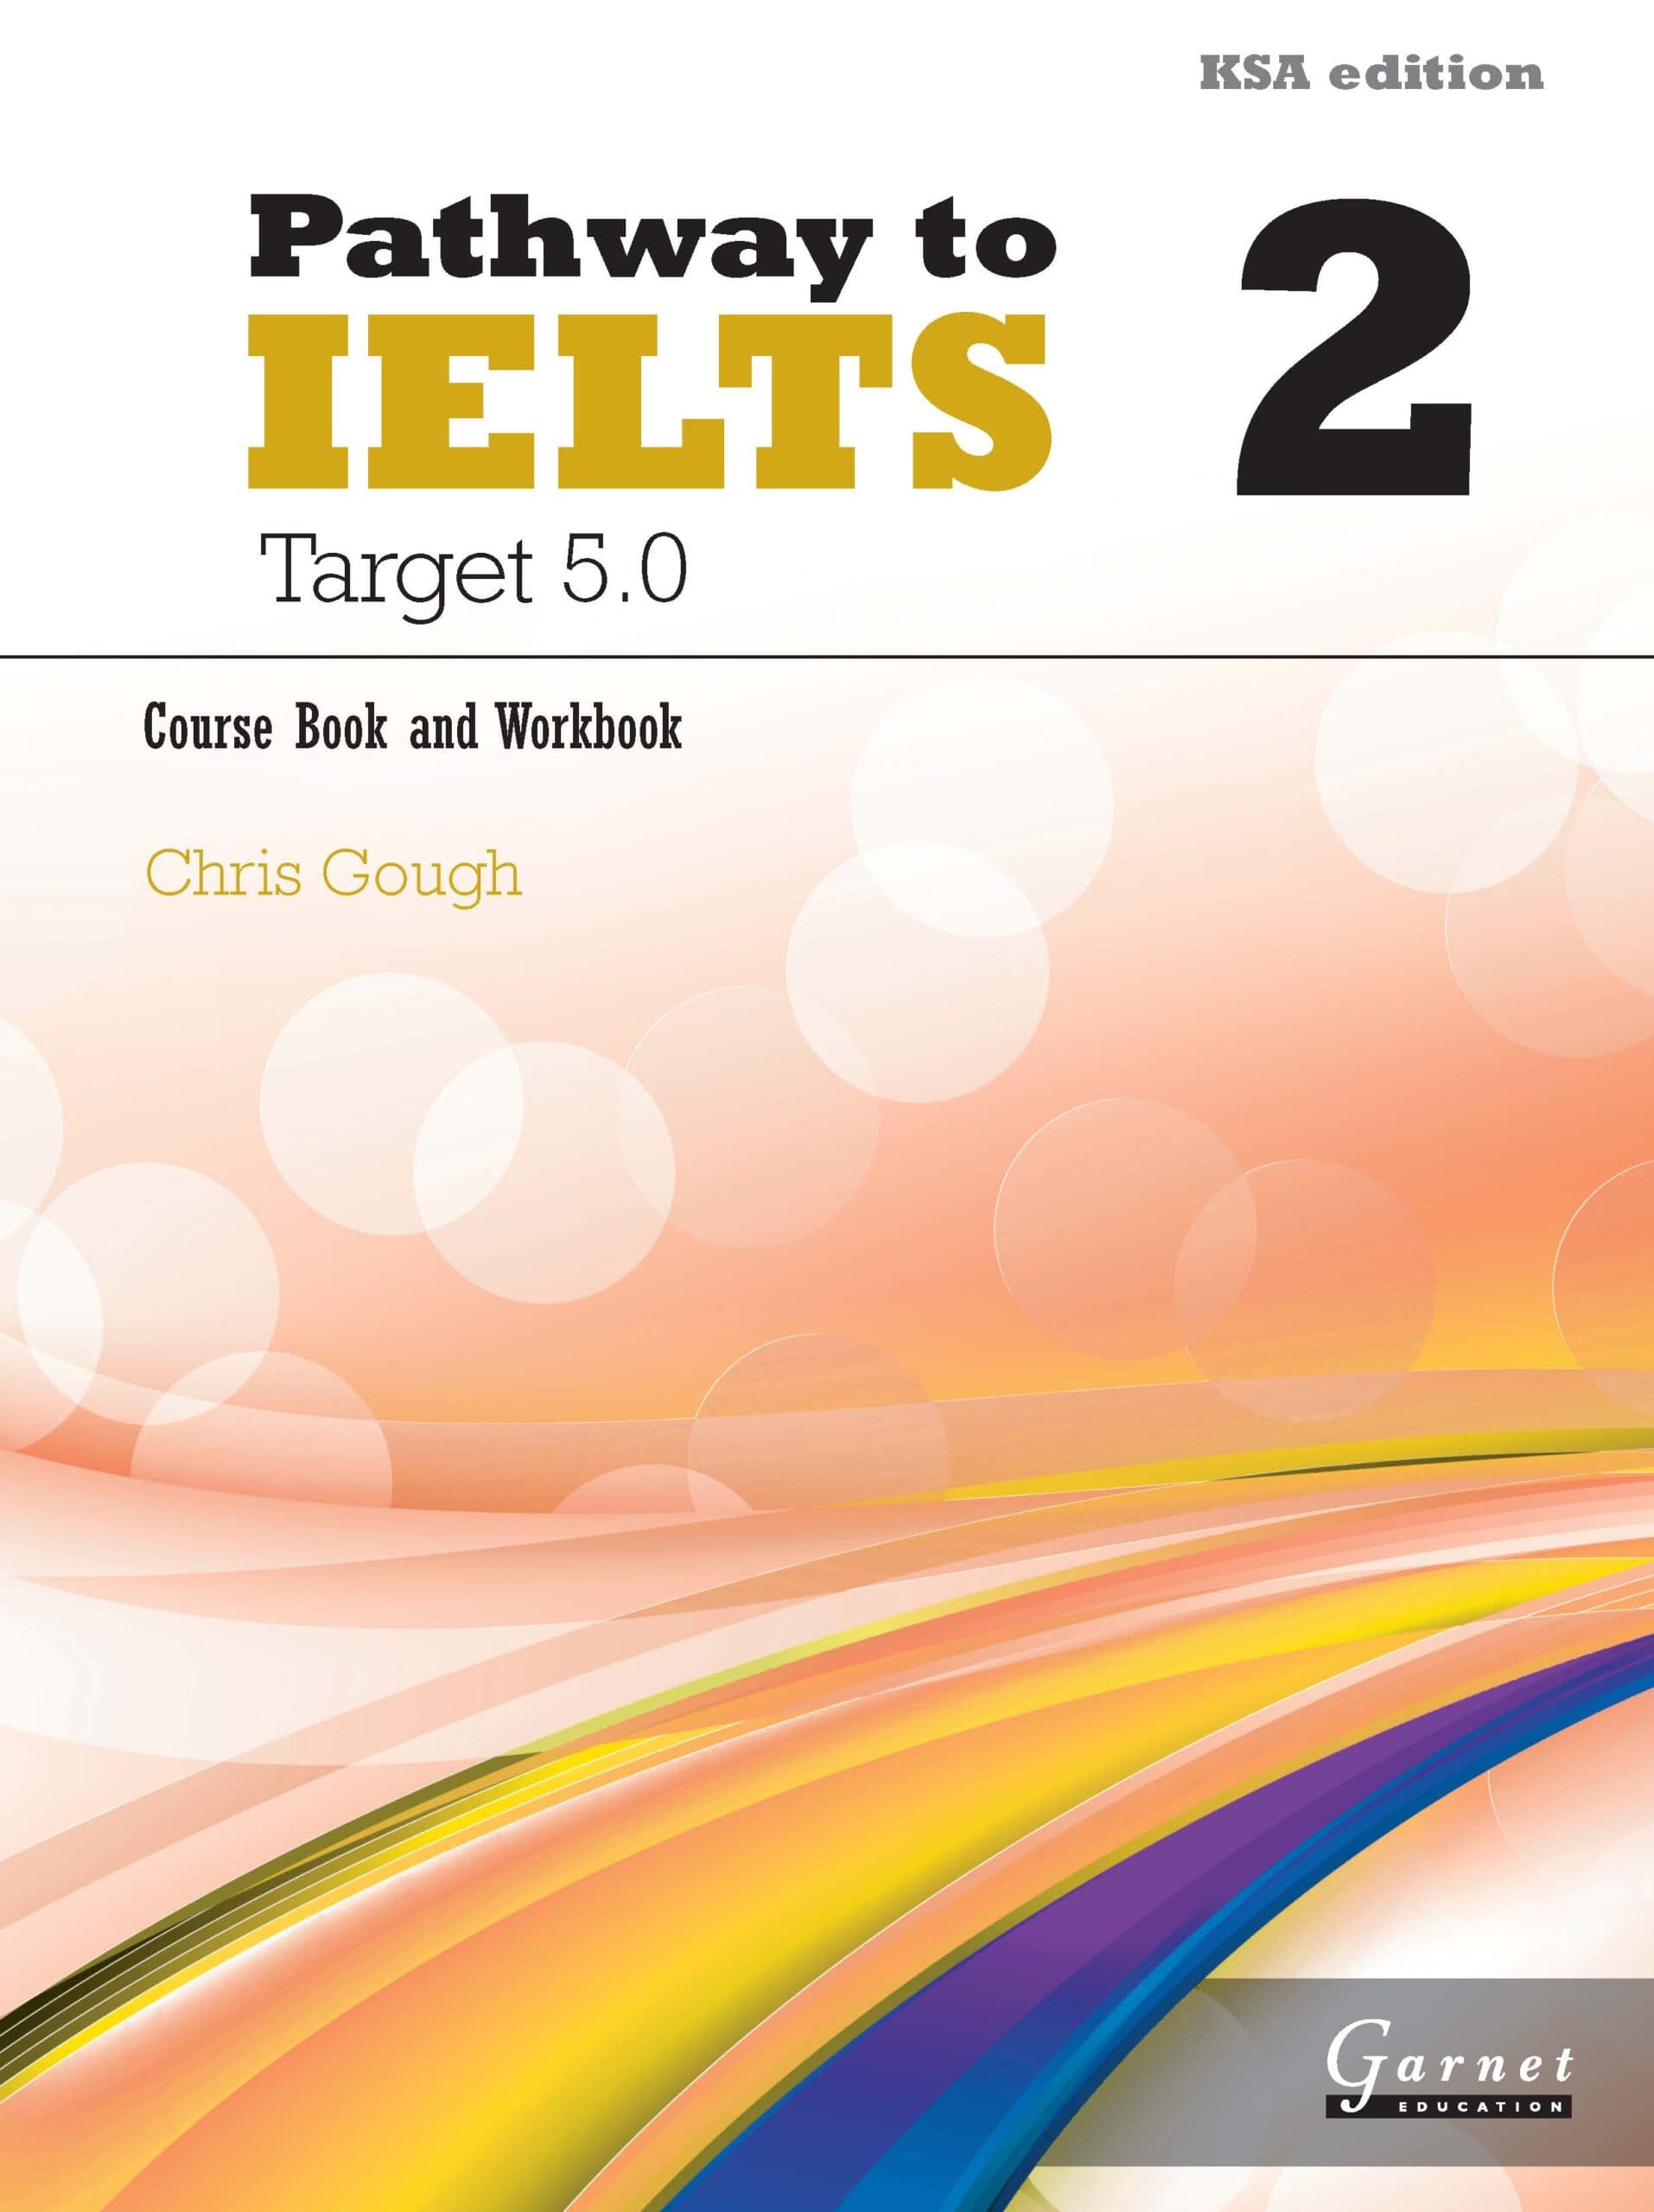 Pathway to IELTS - Target level 5